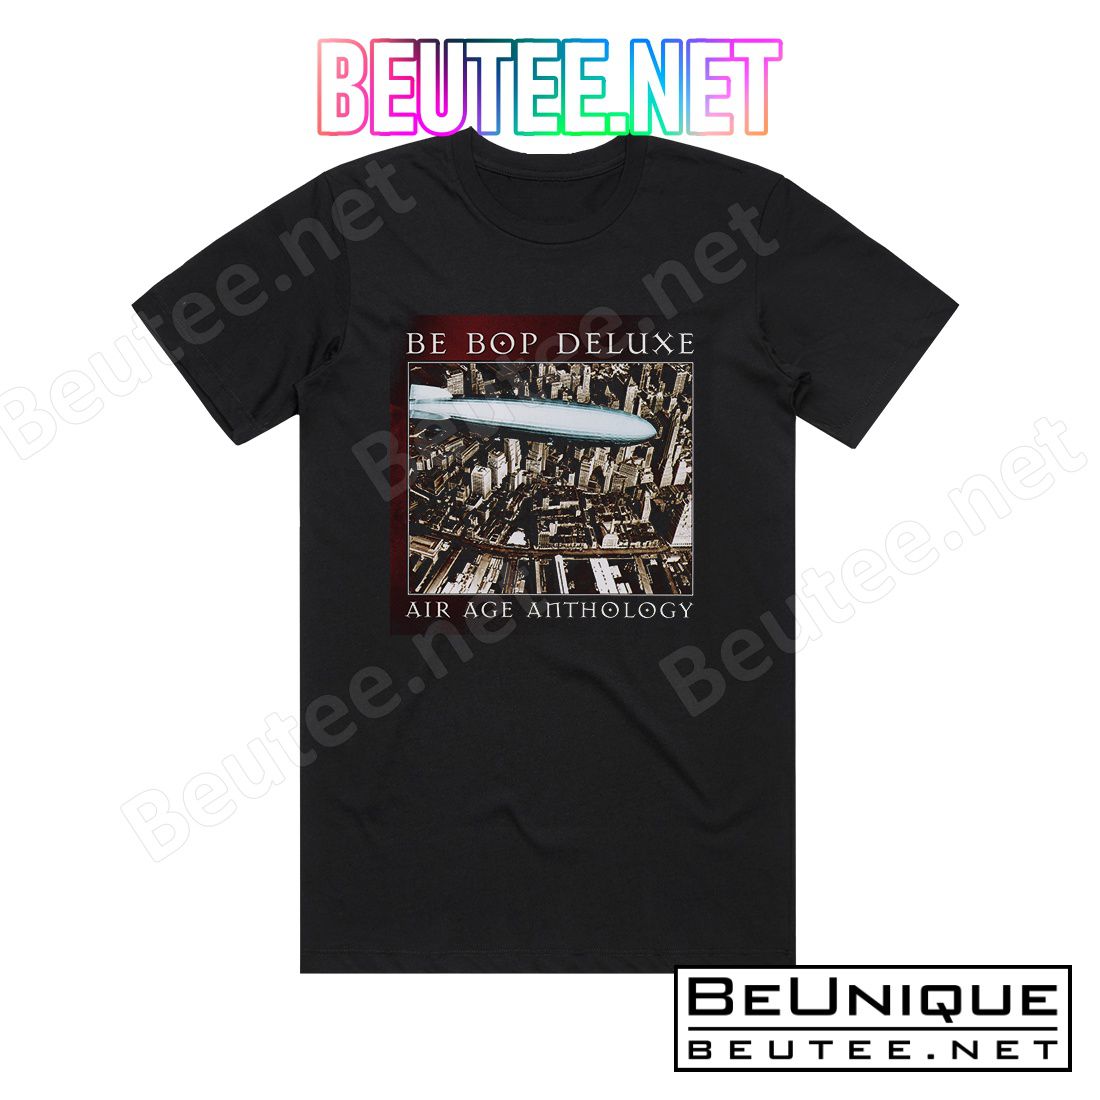 Be Bop Deluxe Air Age Anthology Album Cover T-Shirt